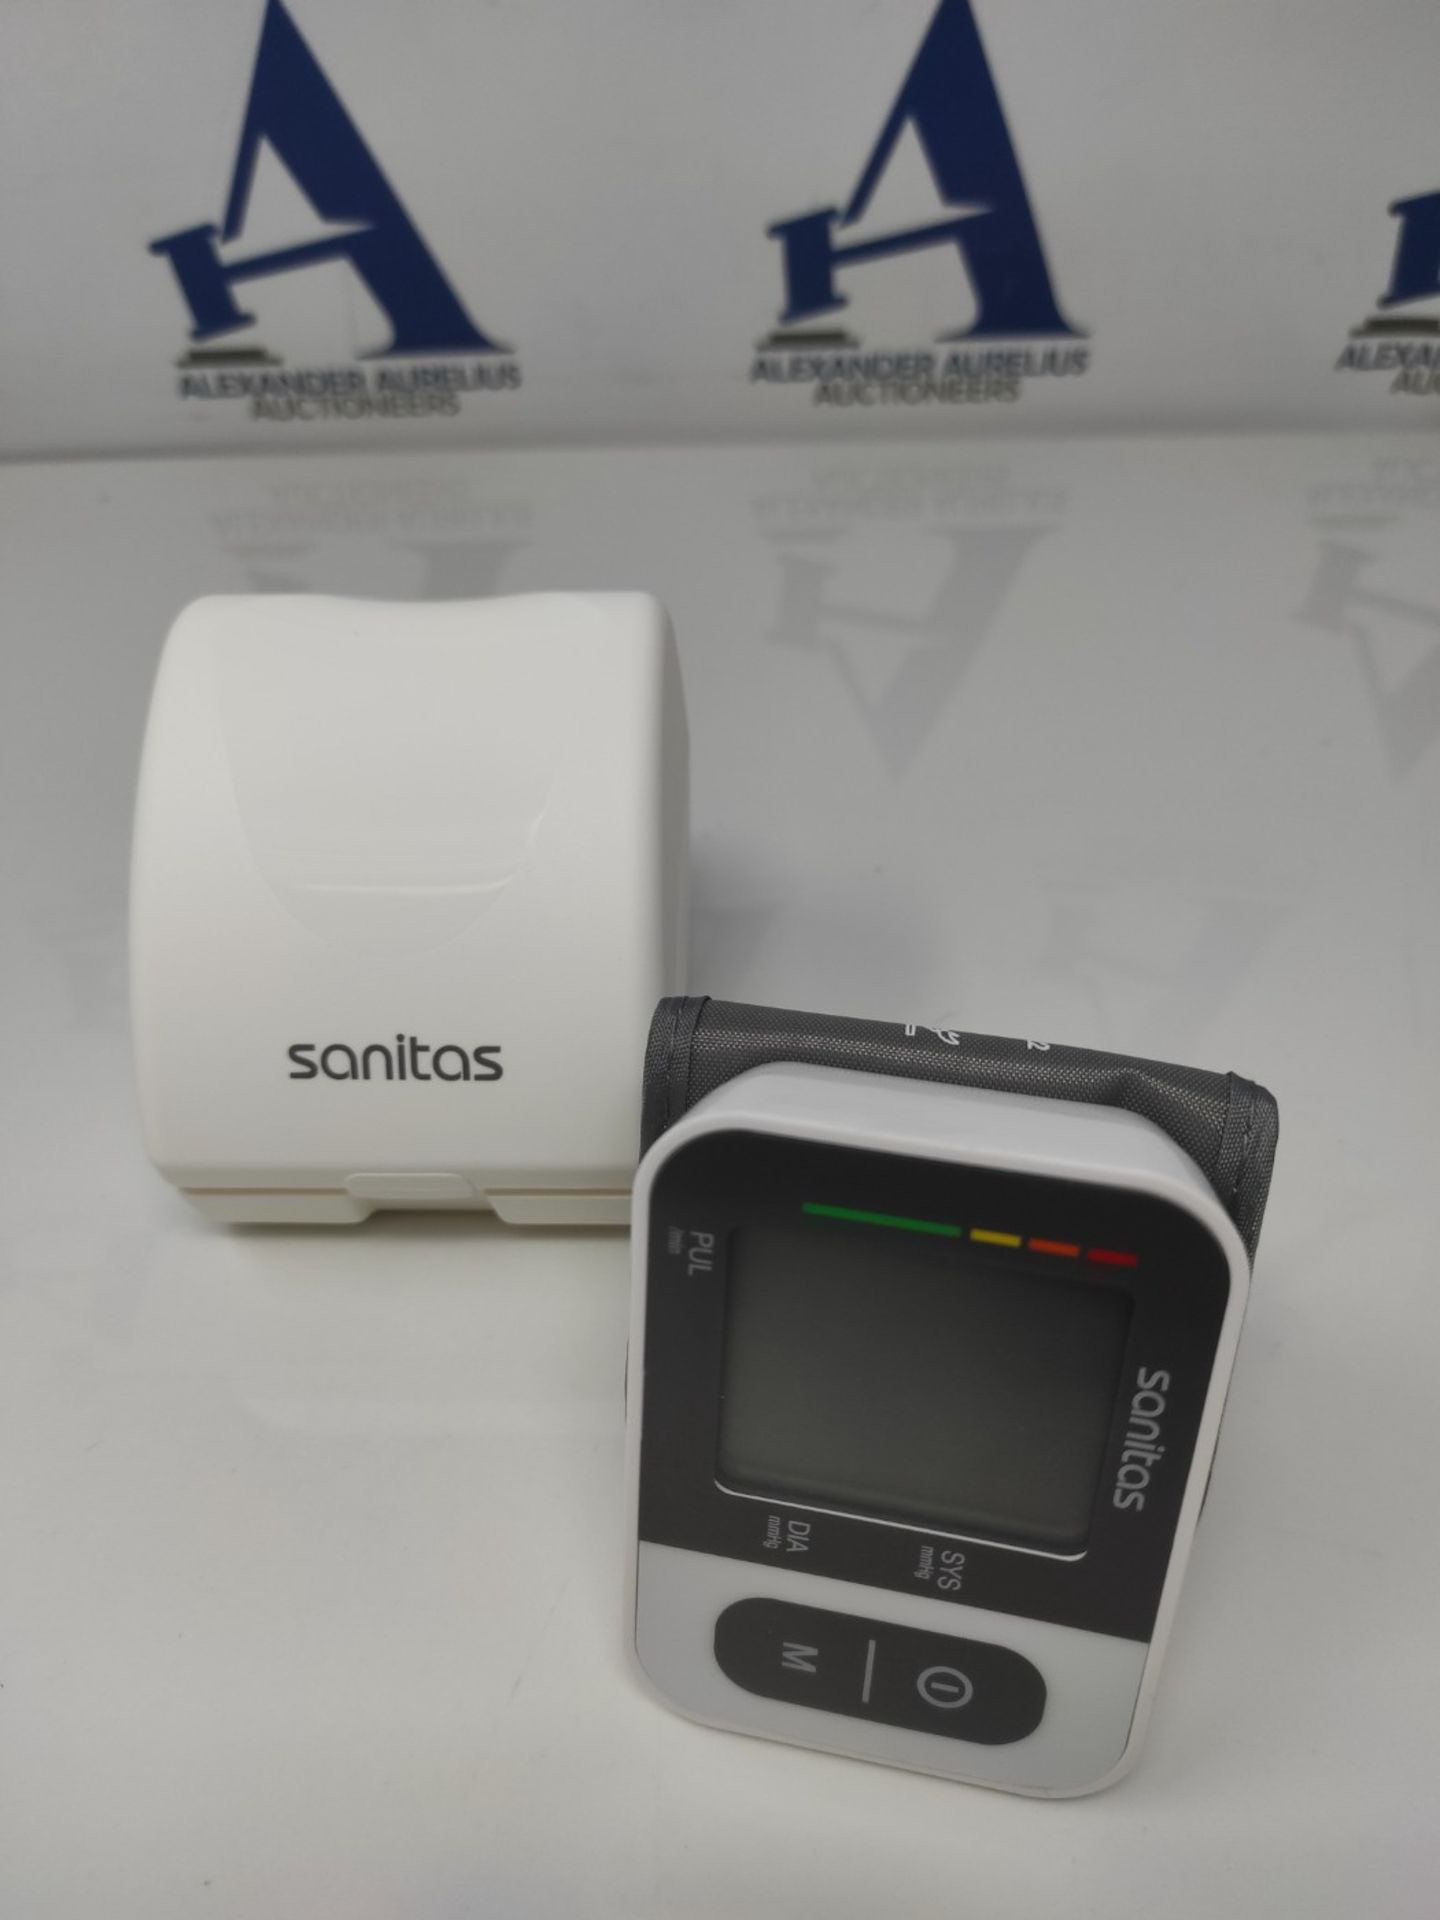 Sanitas SBC 15 wrist blood pressure monitor, fully automatic blood pressure and pulse - Image 6 of 6